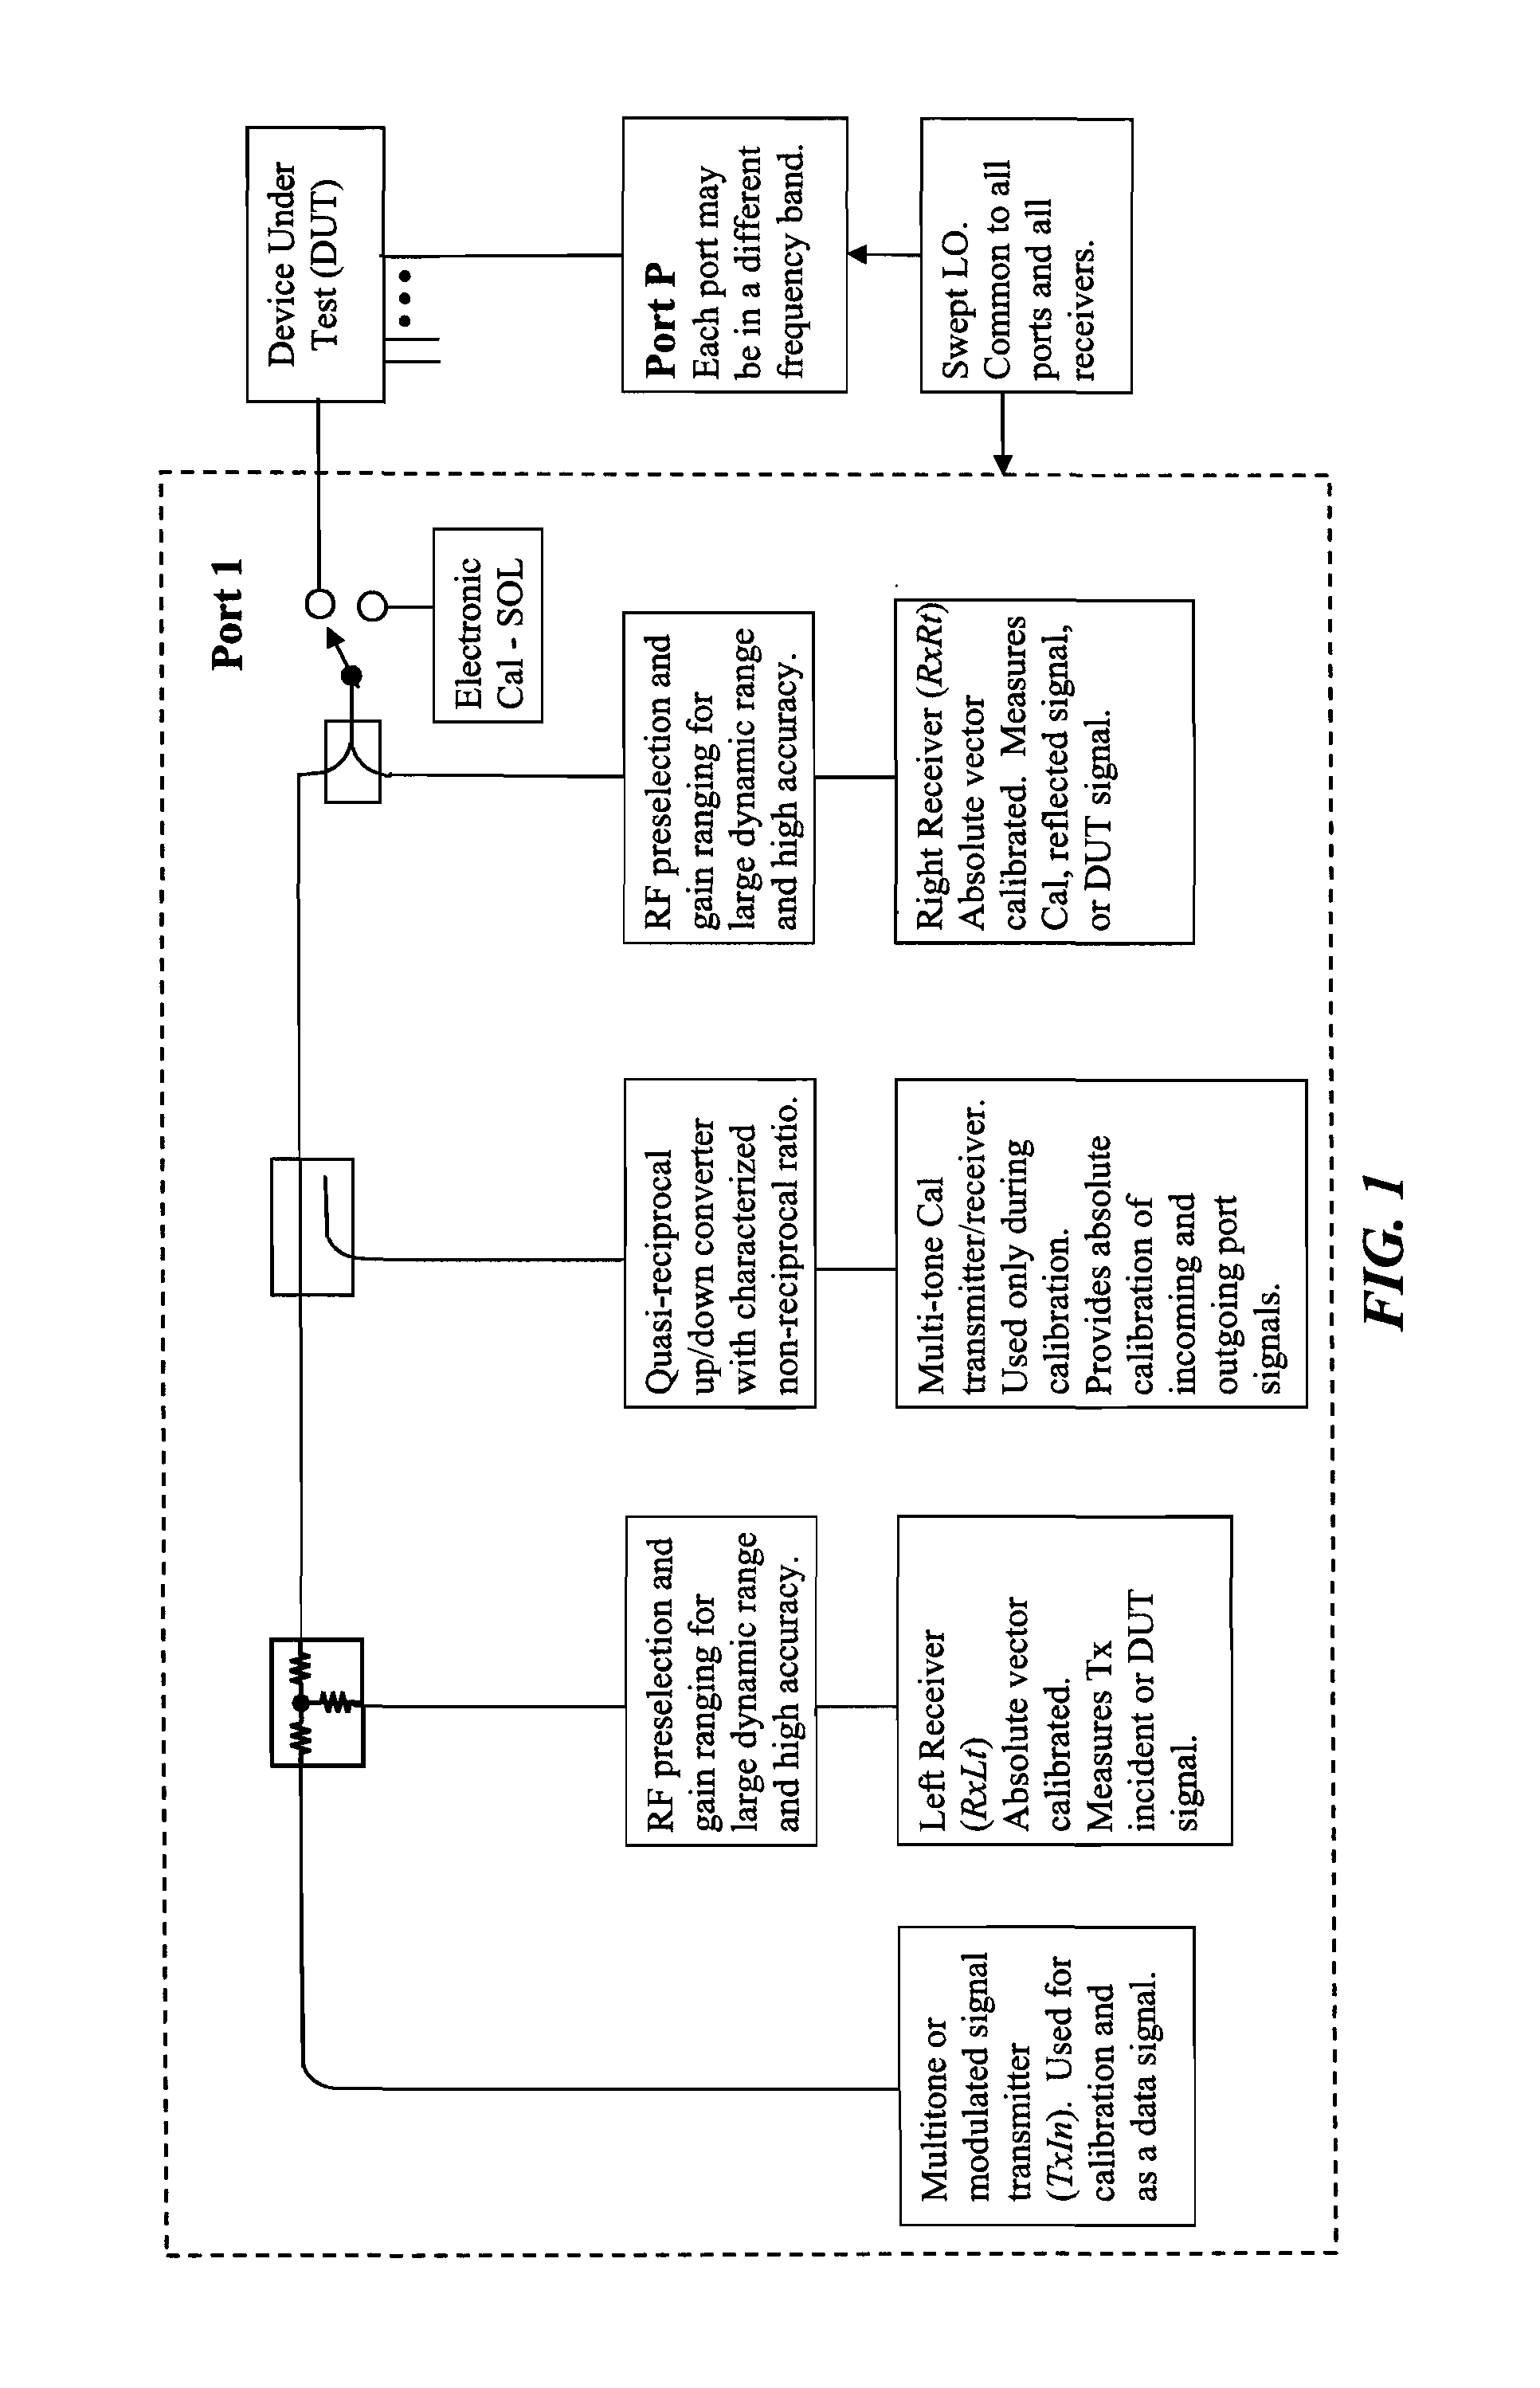 Method for measuring absolute magnitudes and absolute phase relationships over a wide bandwidth